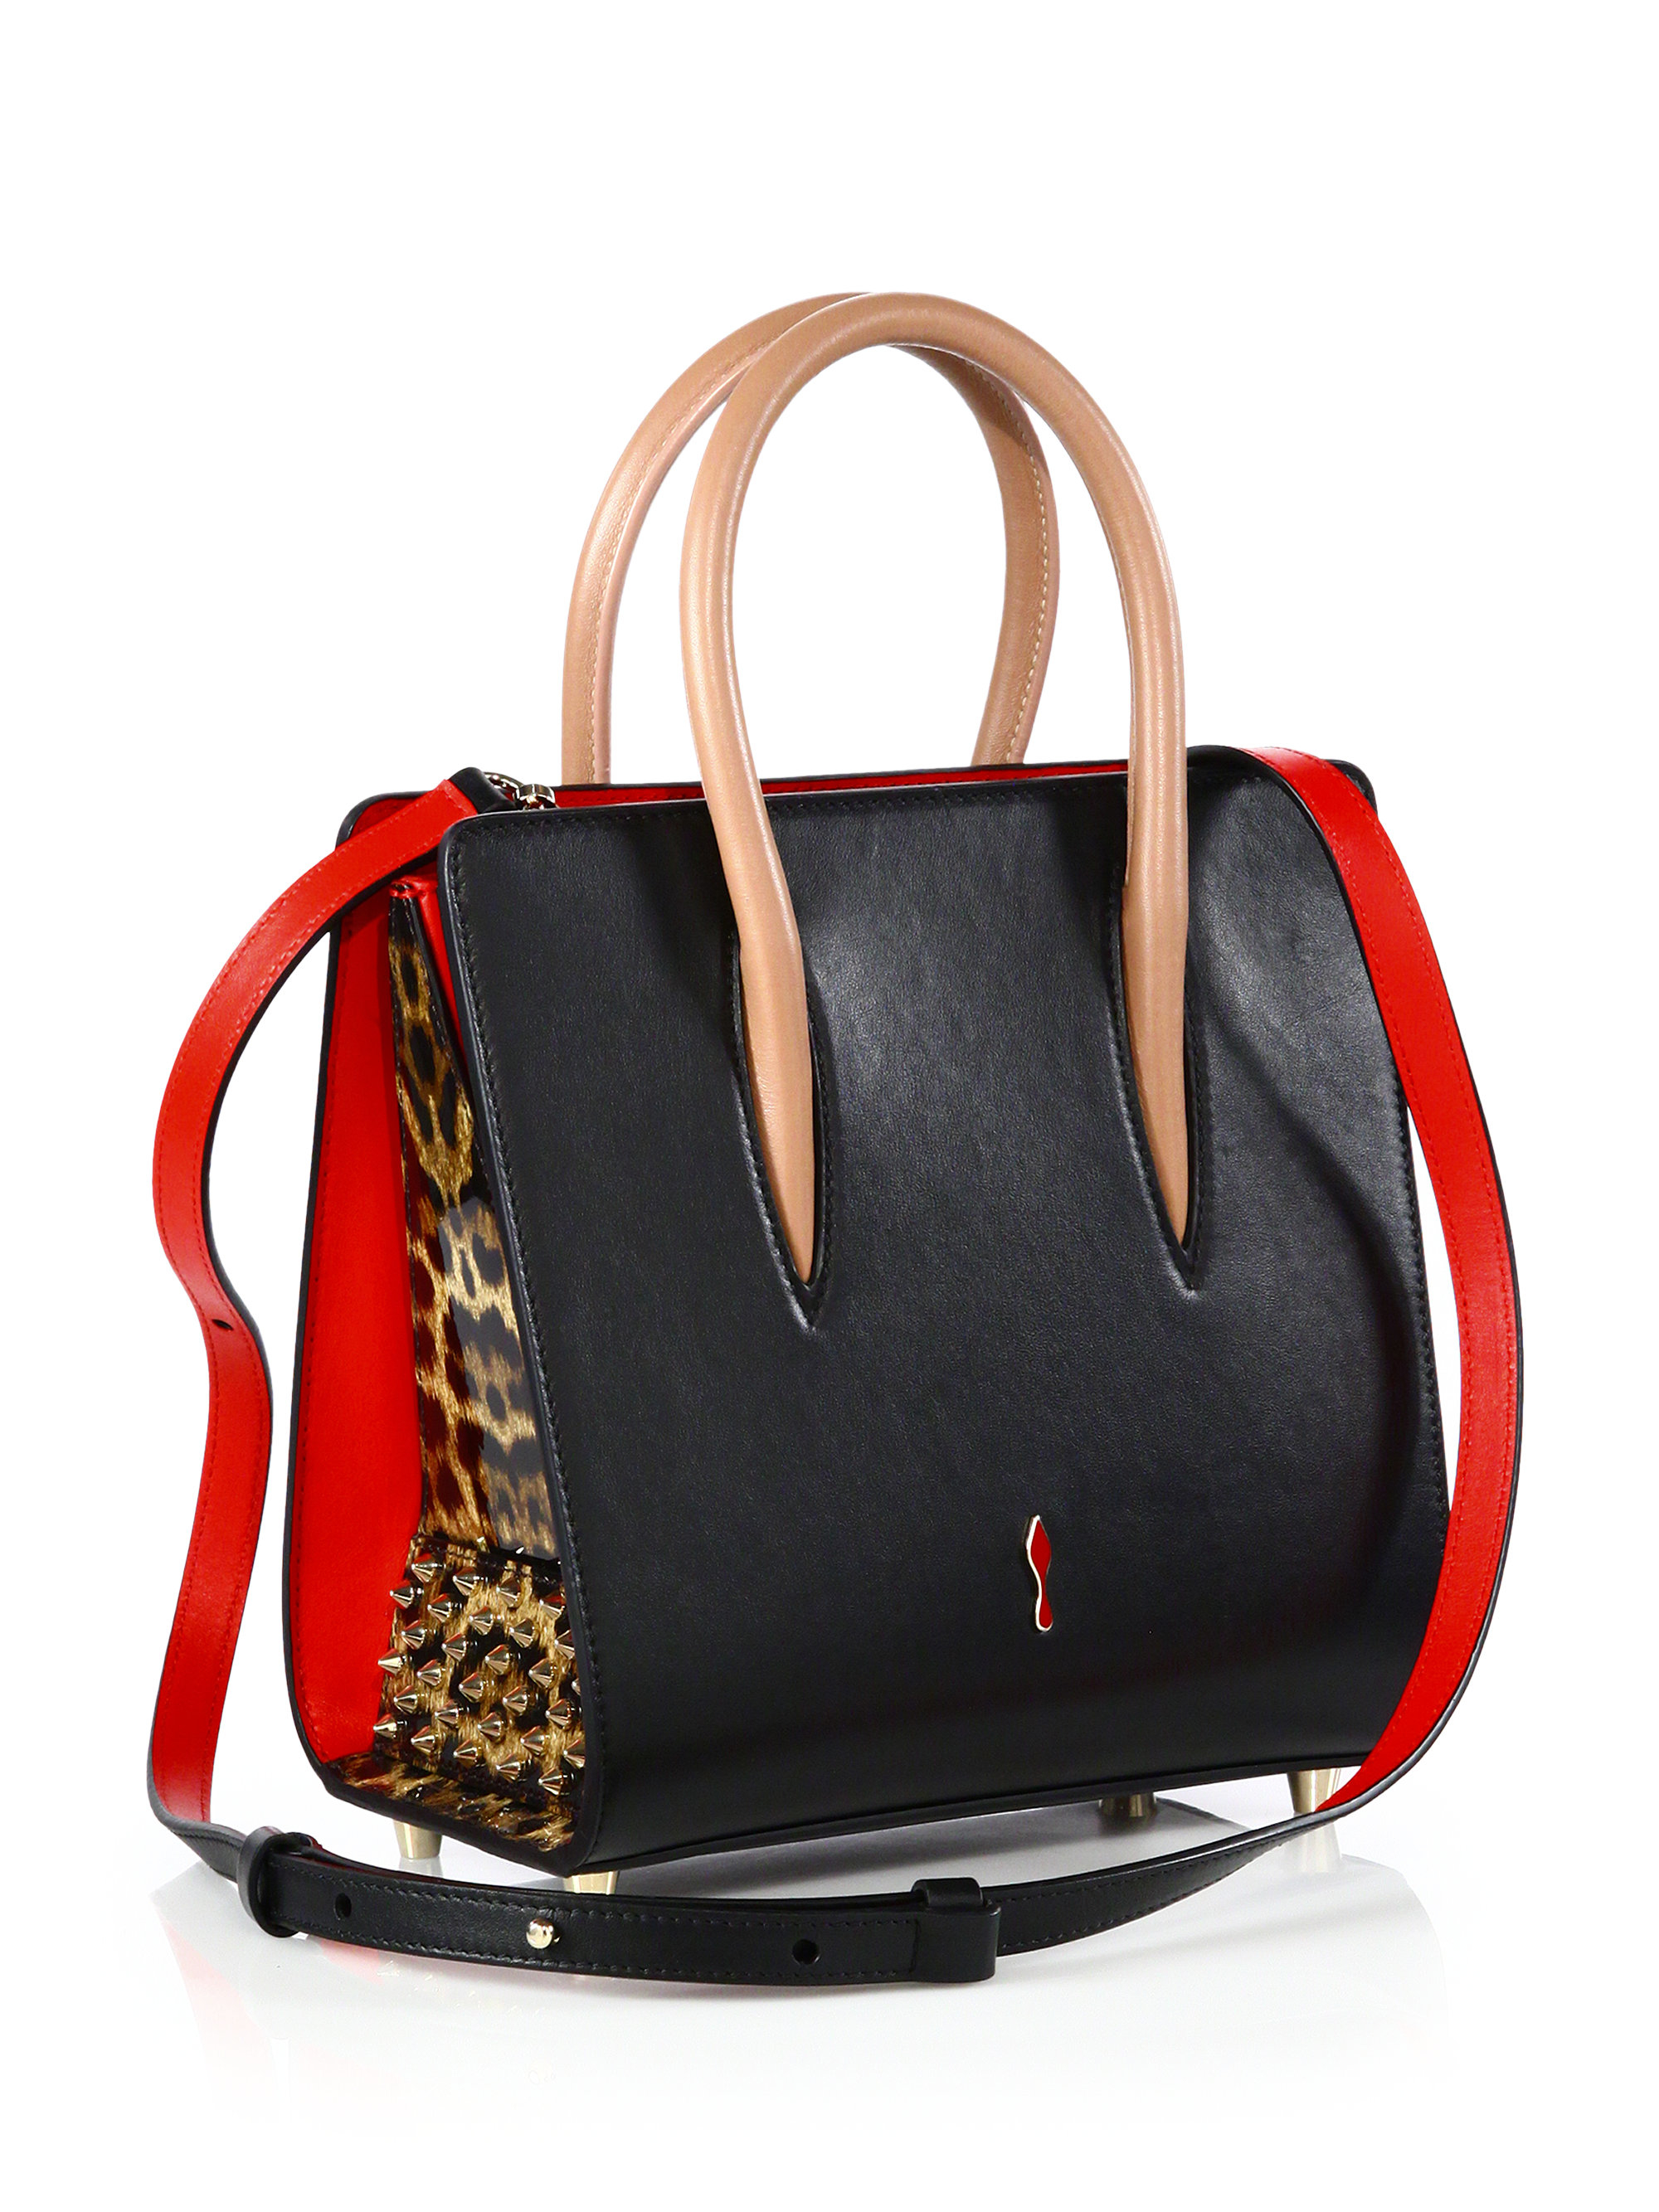 Christian louboutin Paloma Leopard-Print Tote in Black | Lyst